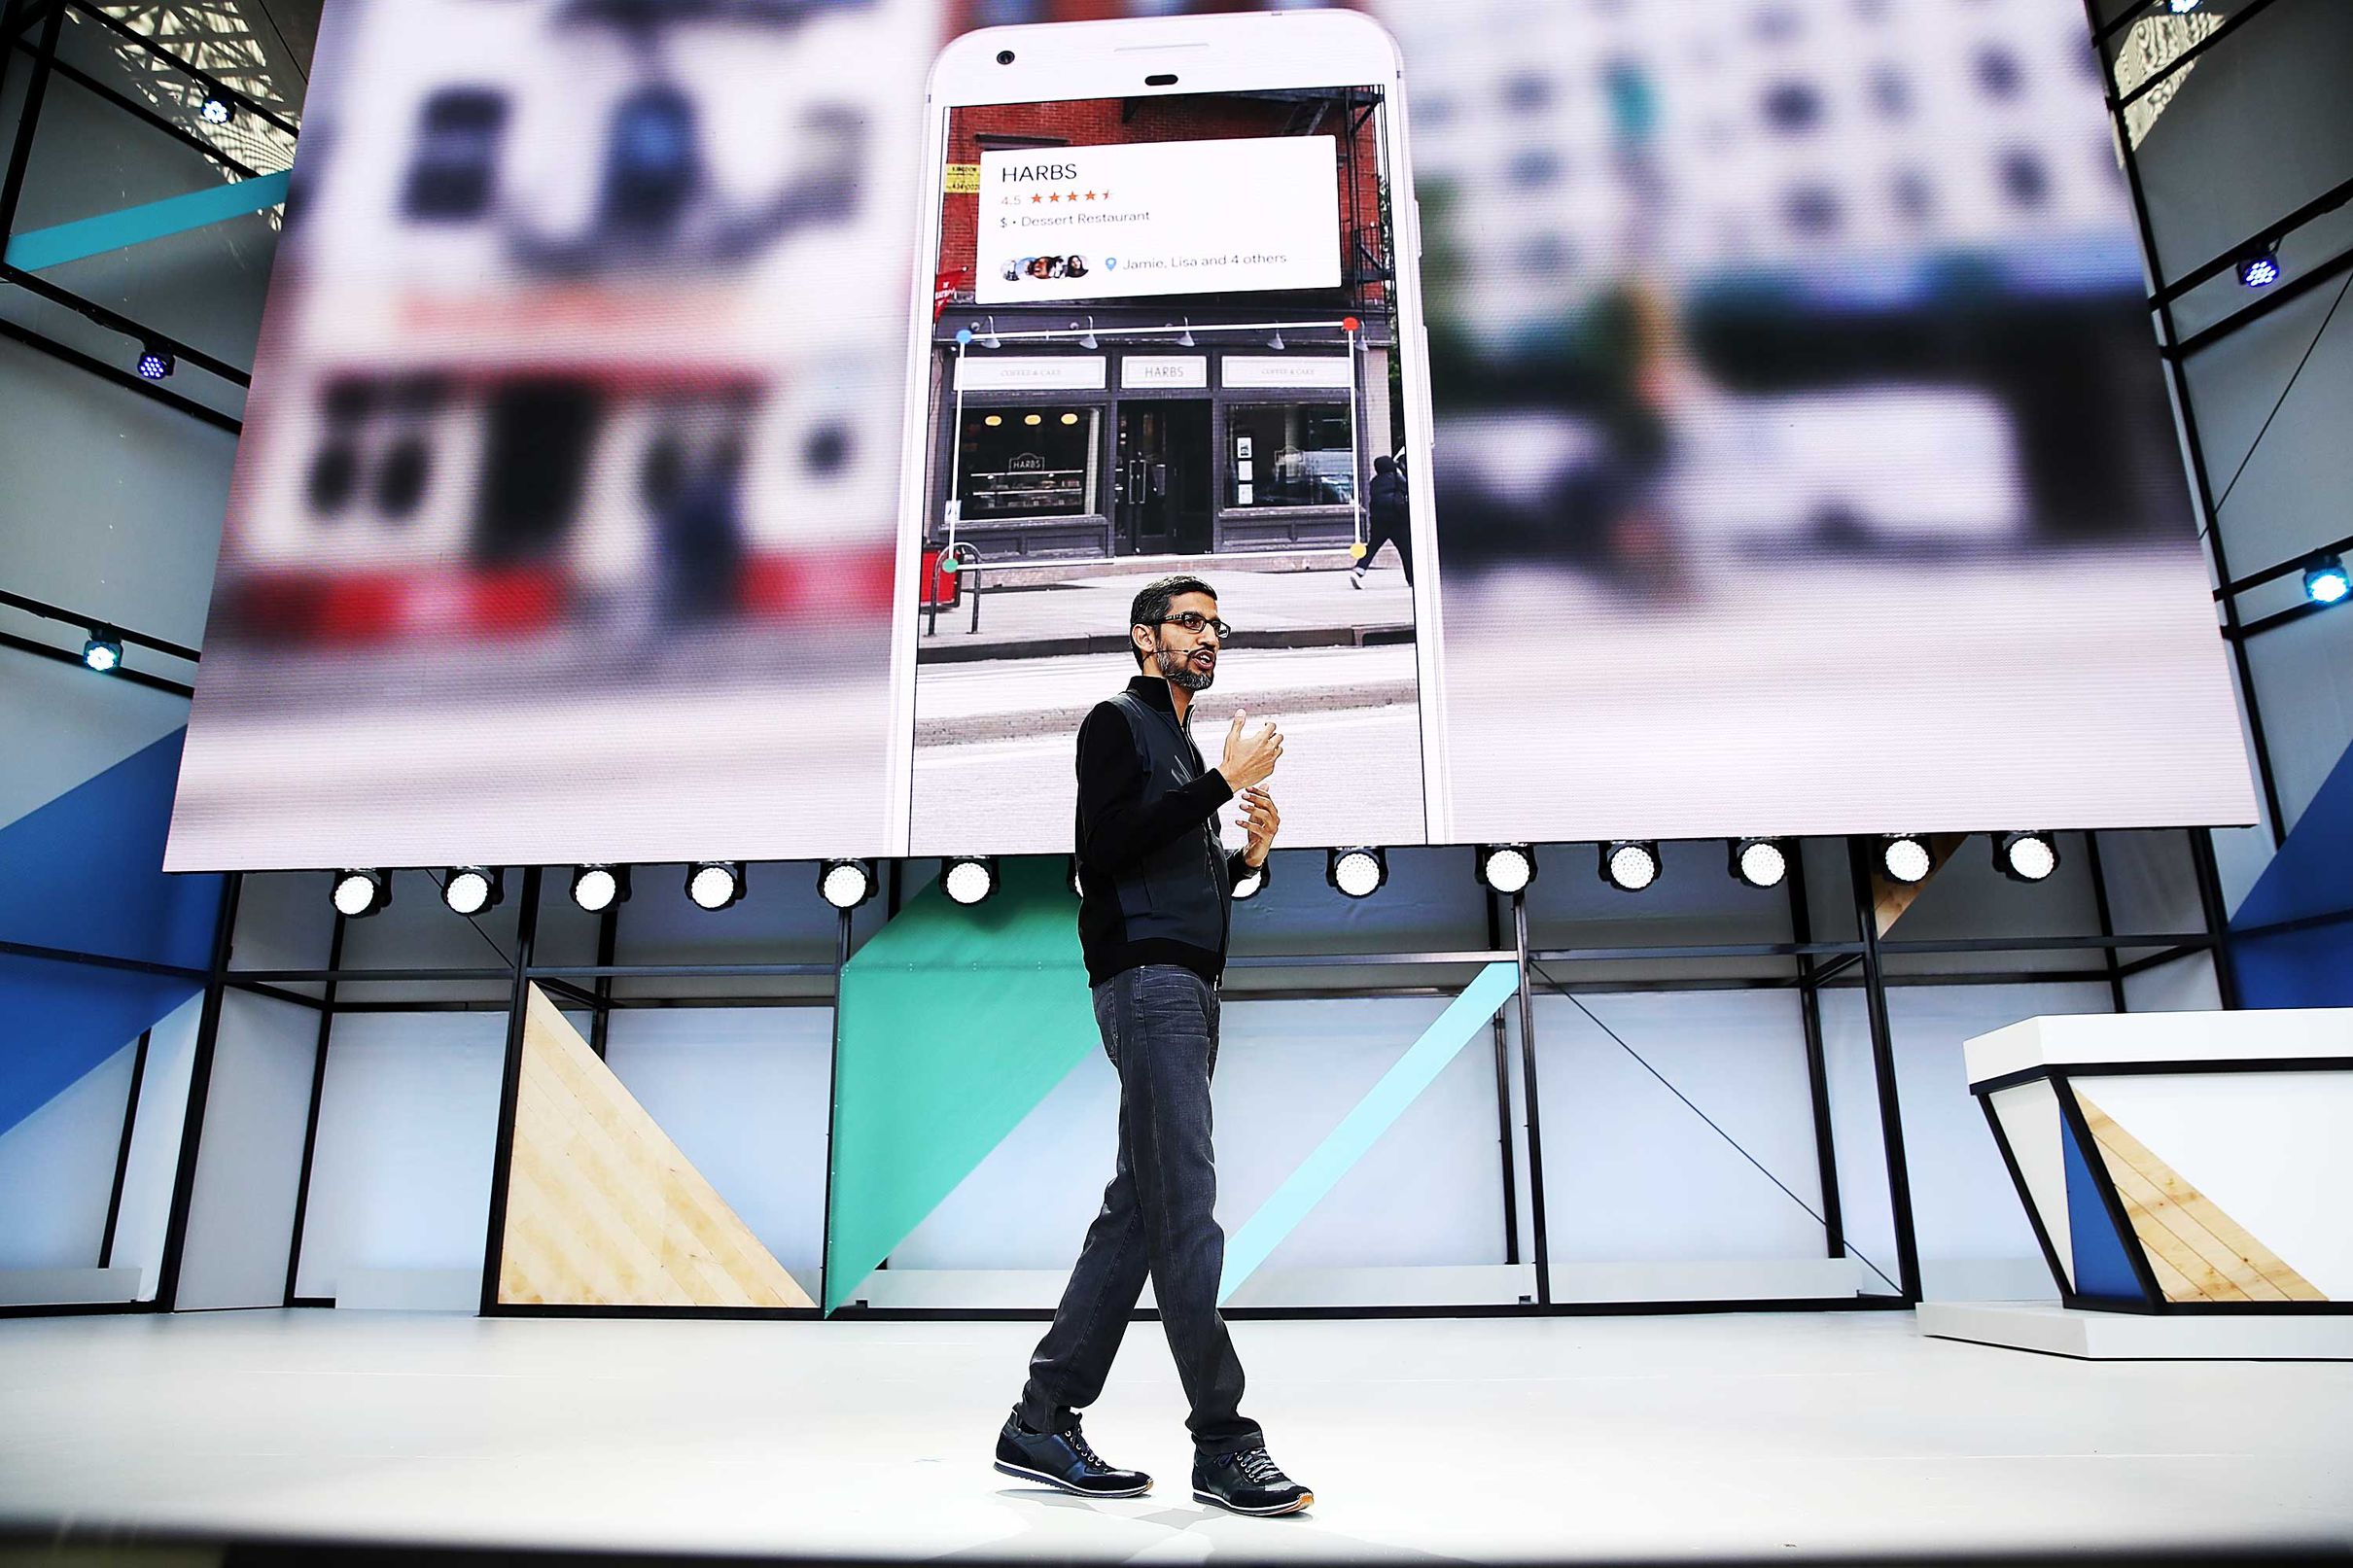 Google CEO Sundar Pichai Commits $800 Million to Support SMBs, Health Workers Amid COVID-19 Pandemic